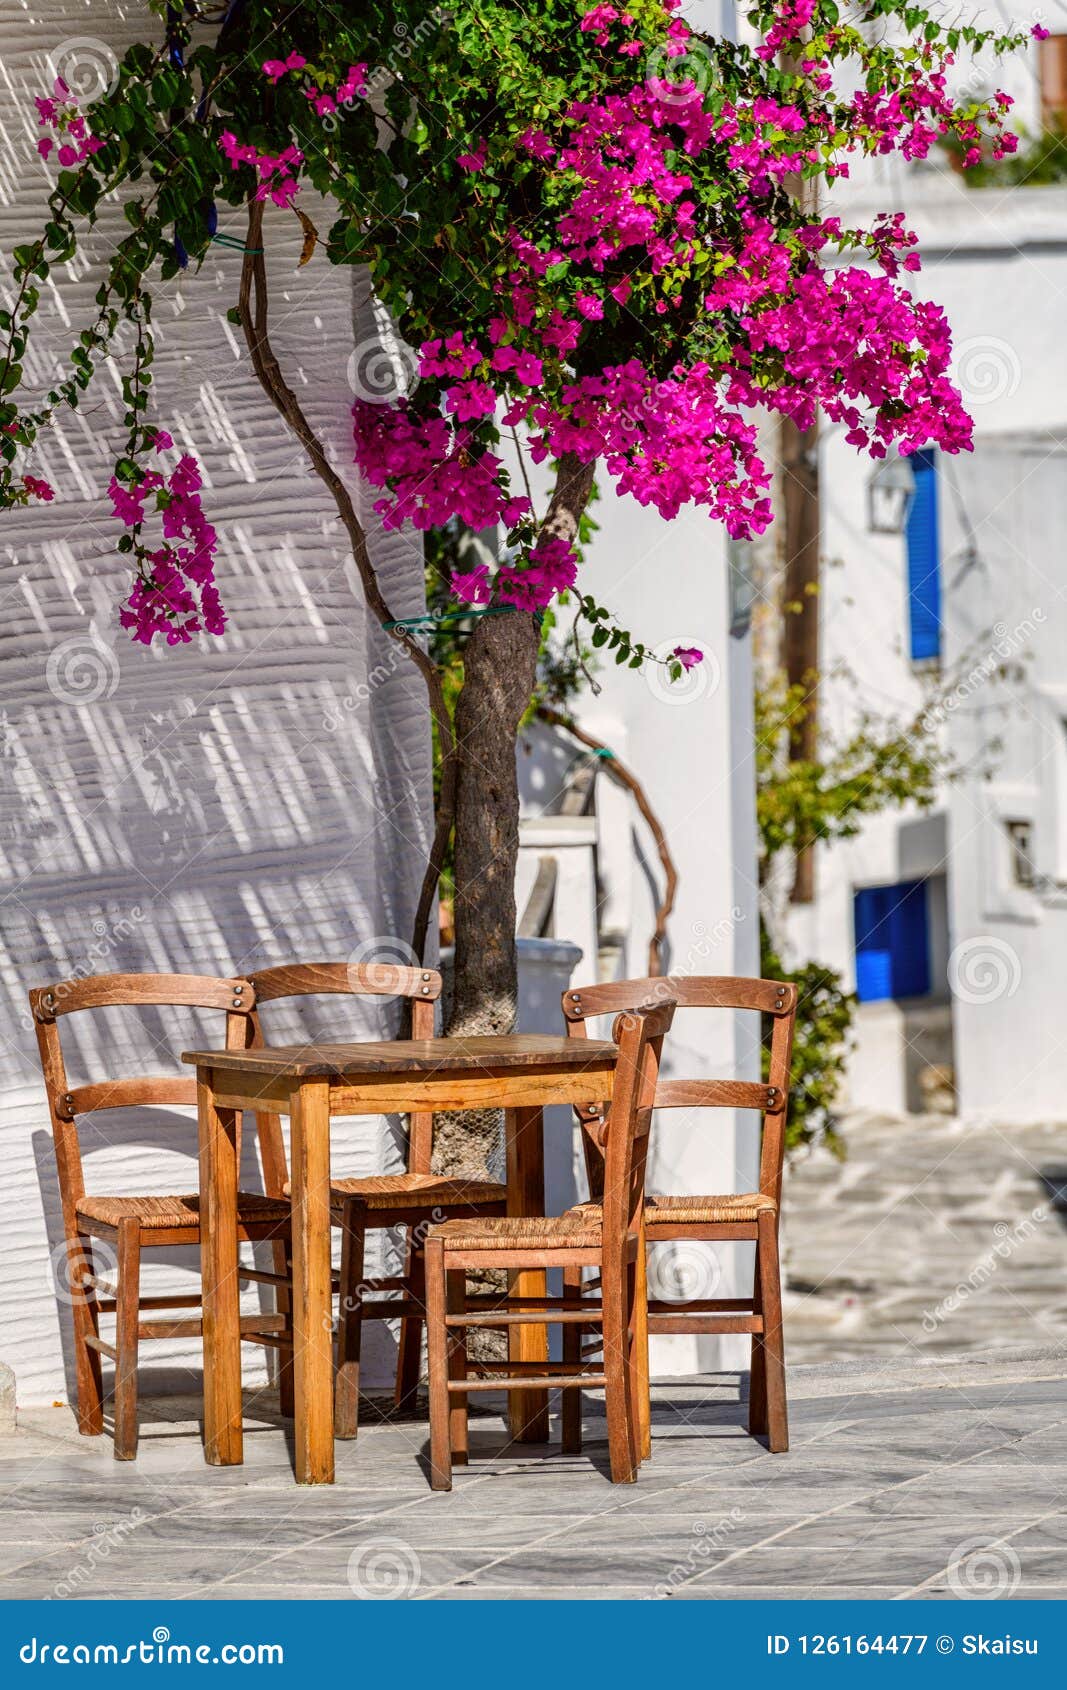 cyclades style streets and architecture in lefkes village, paros, greece